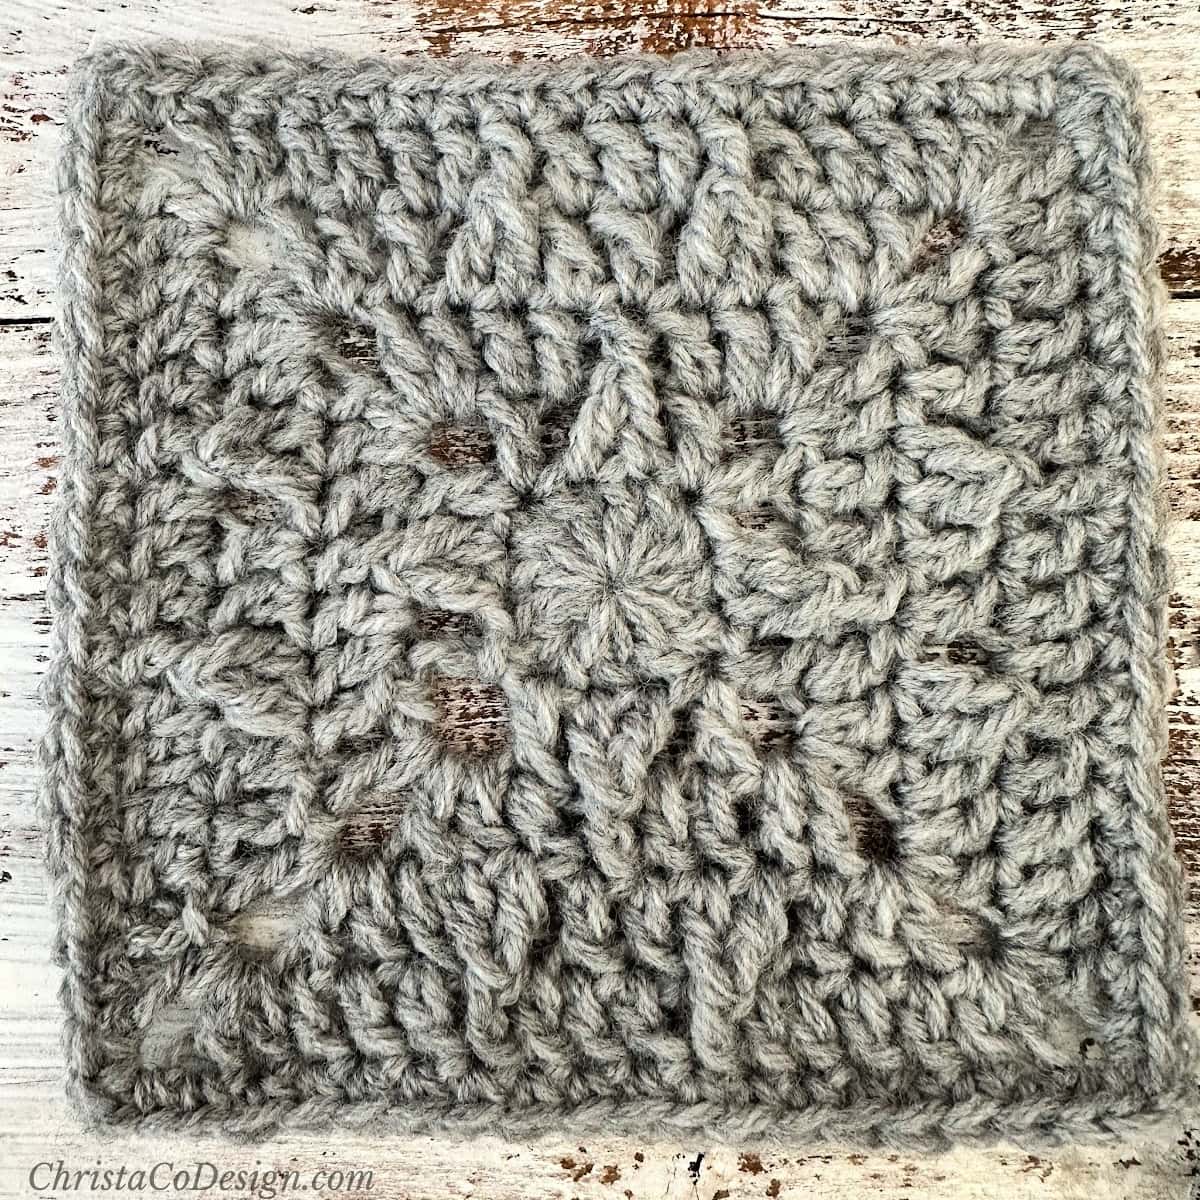 Close up of grey crochet square.